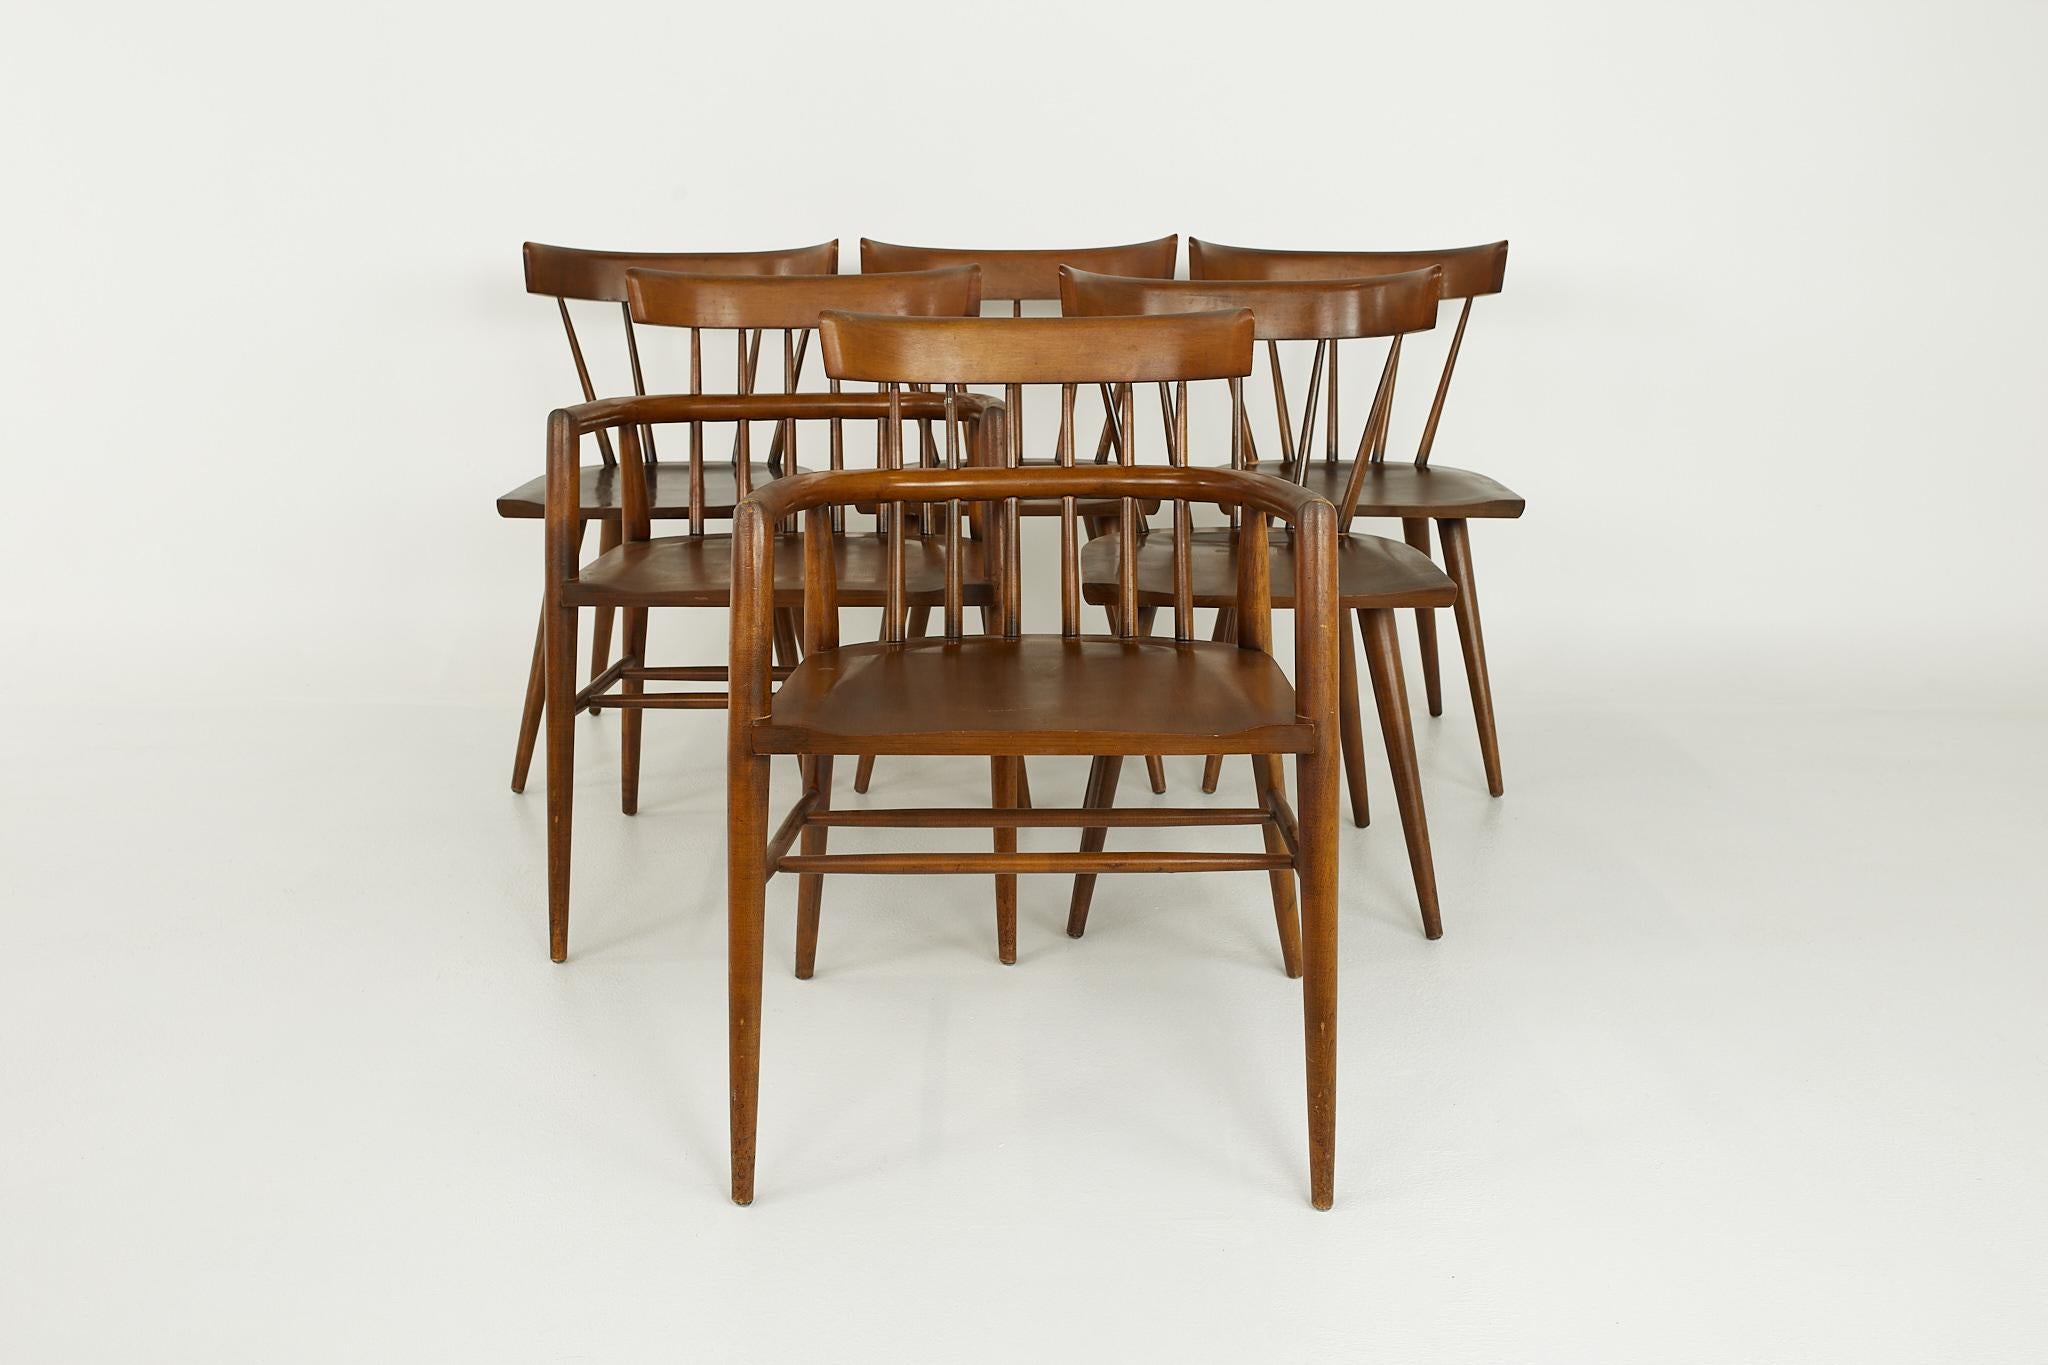 Paul McCobb Planner Group mid century dining chairs - Set of 6

These chairs measure: 21.5 wide x 21.75 deep x 30.5 inches high, with a seat height of 18 and arm height of 25.75 inches

?All pieces of furniture can be had in what we call